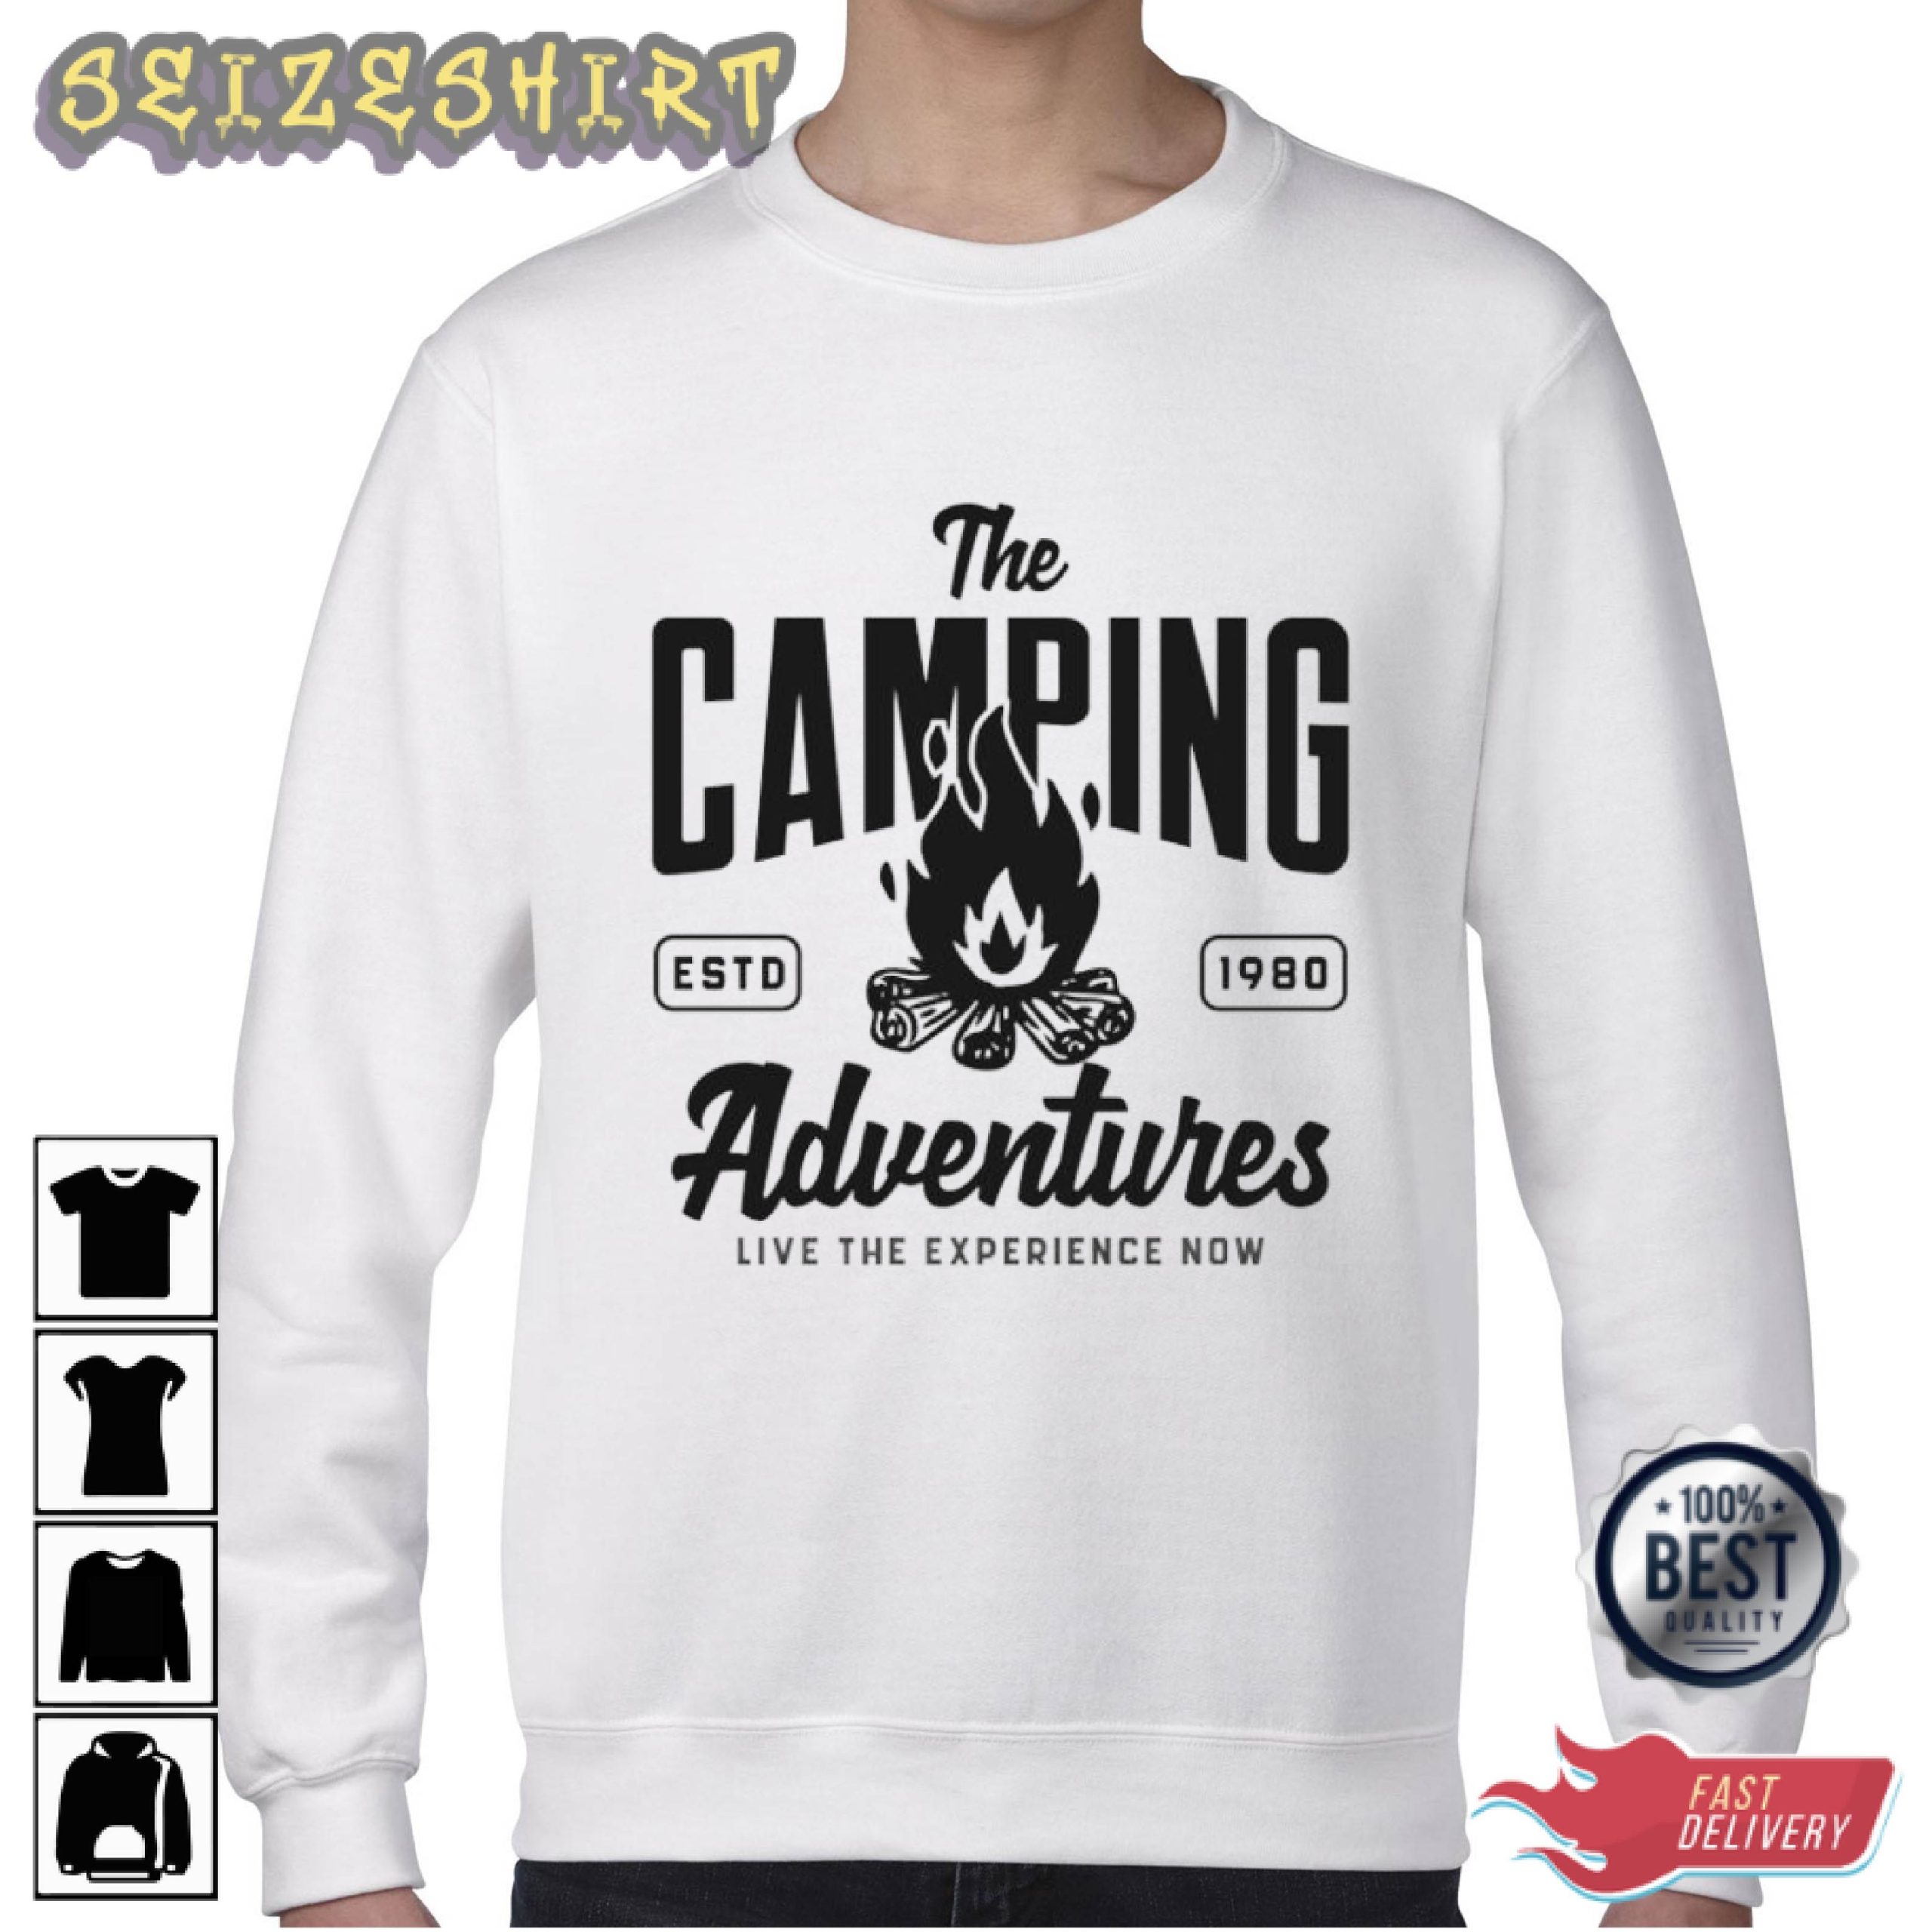 The Camping Adventures 1980 Graphic Tee